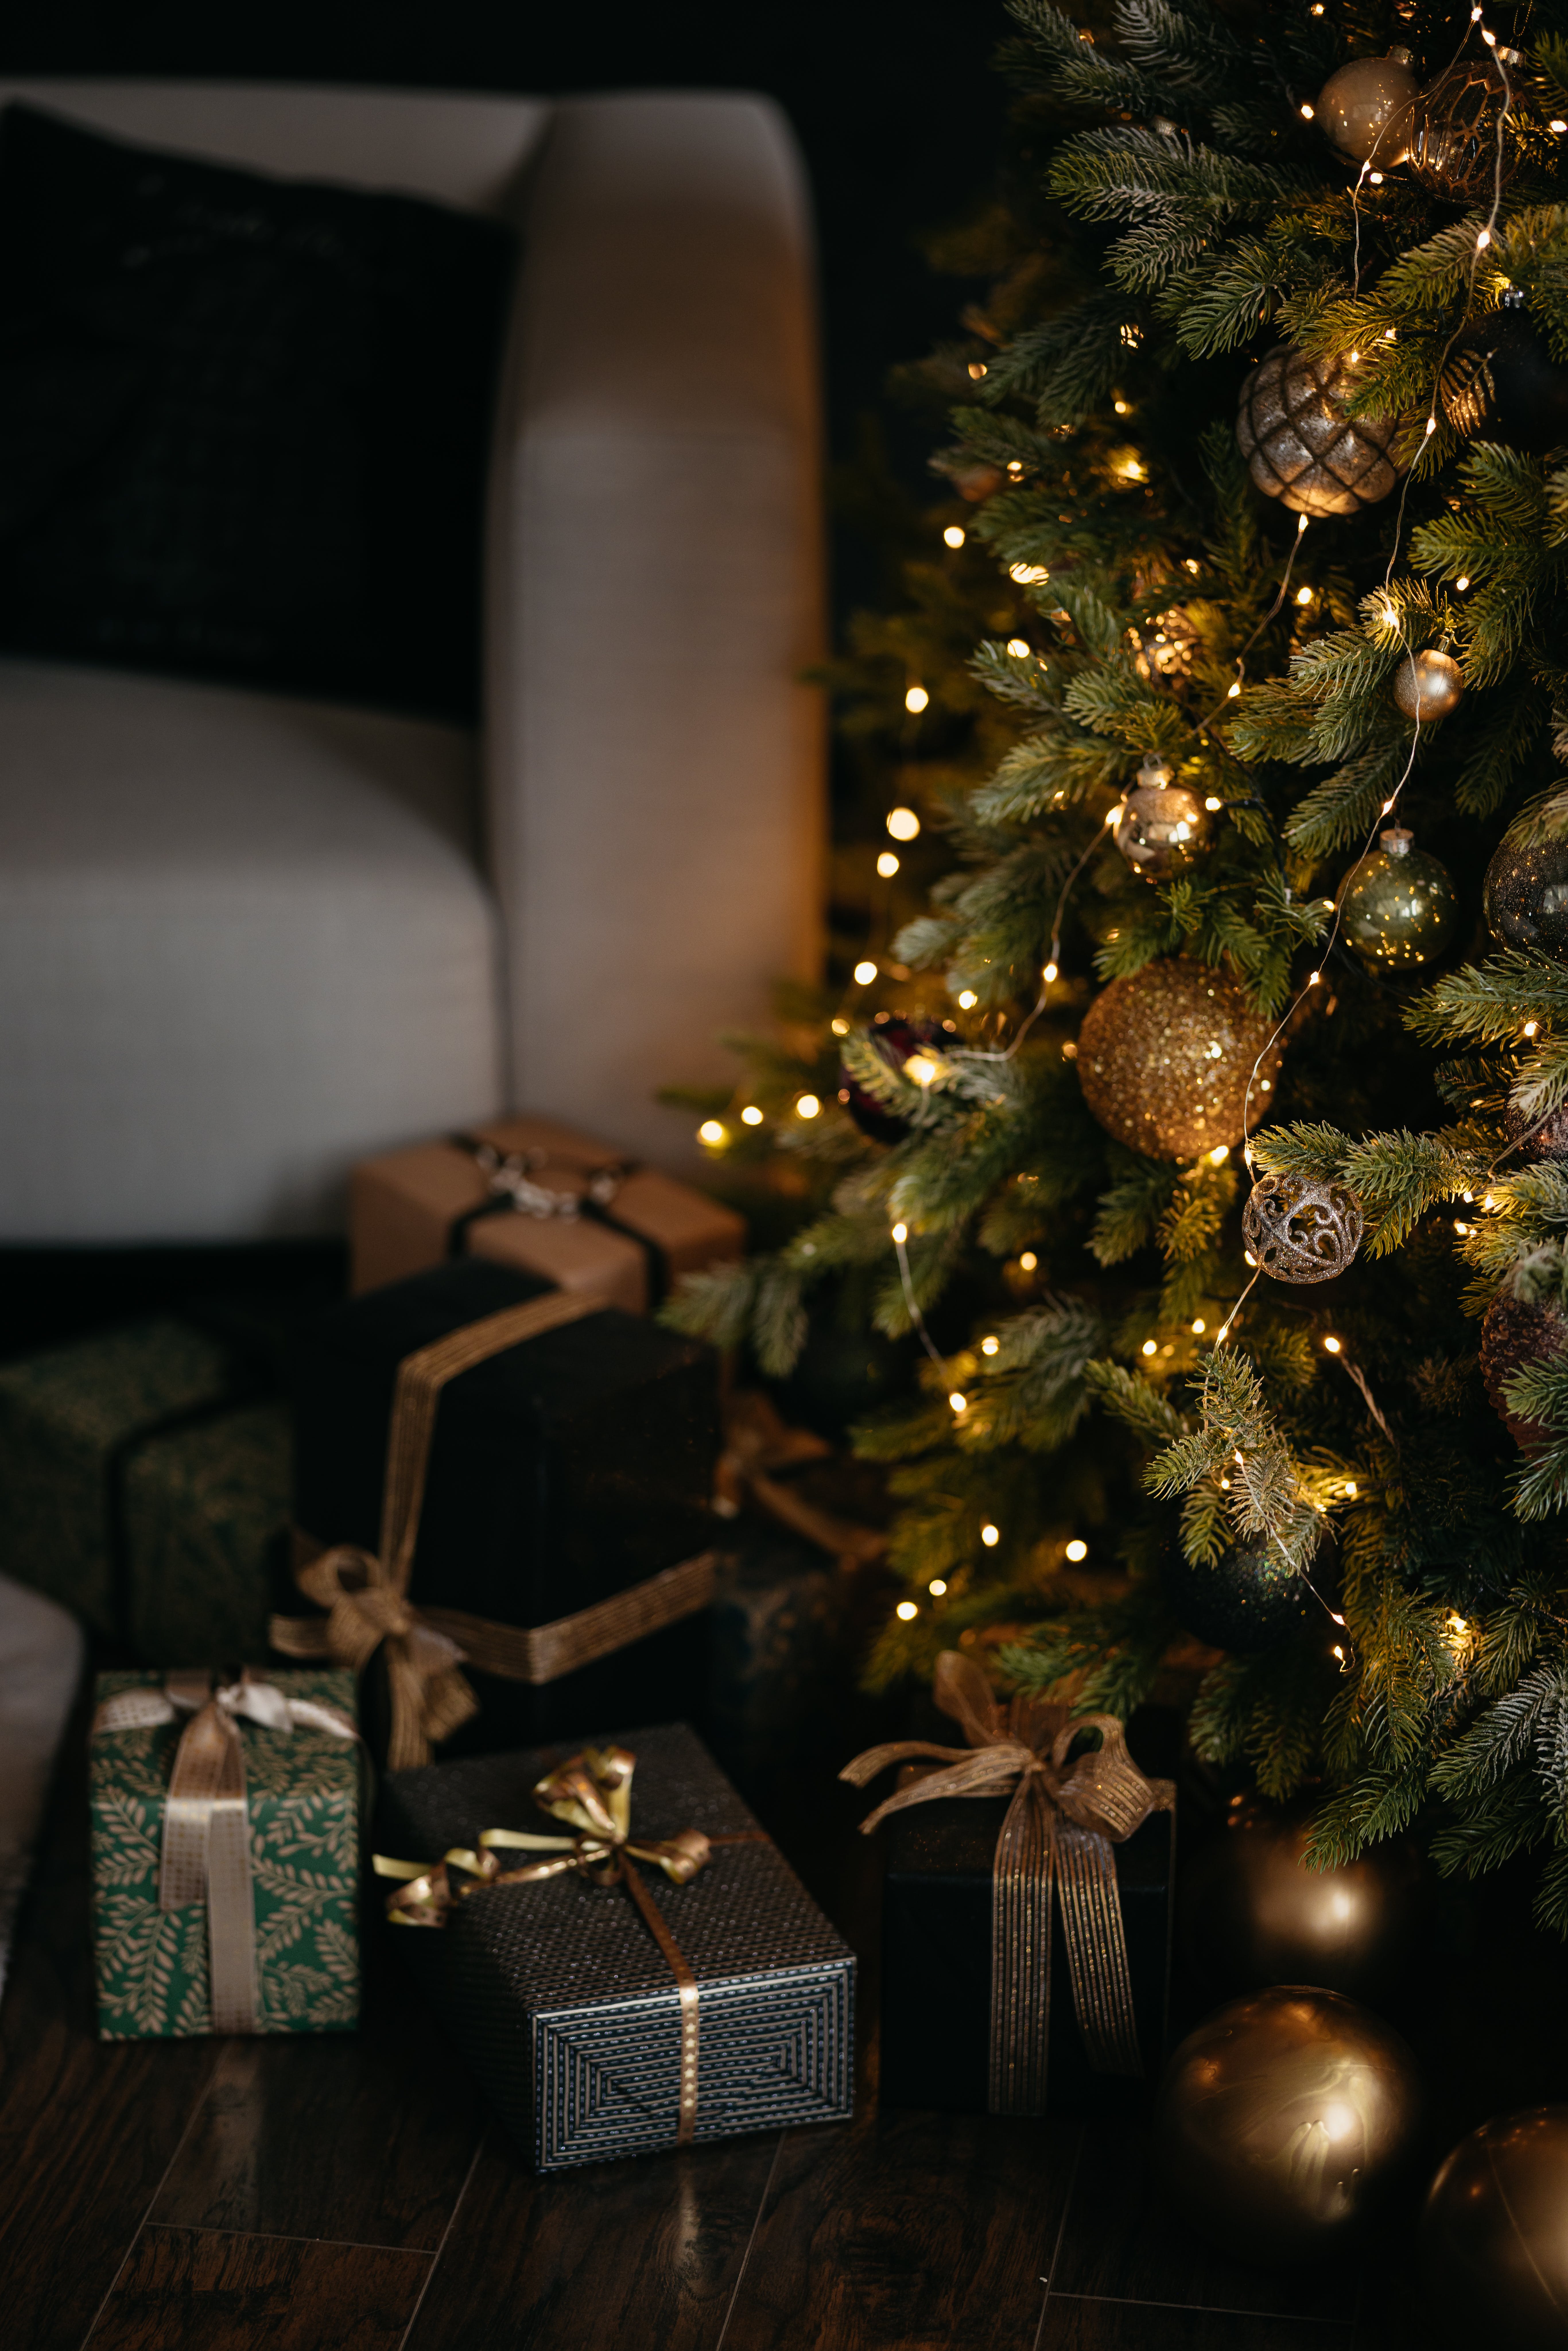 A Christmas tree and gifts | Source: Pexels